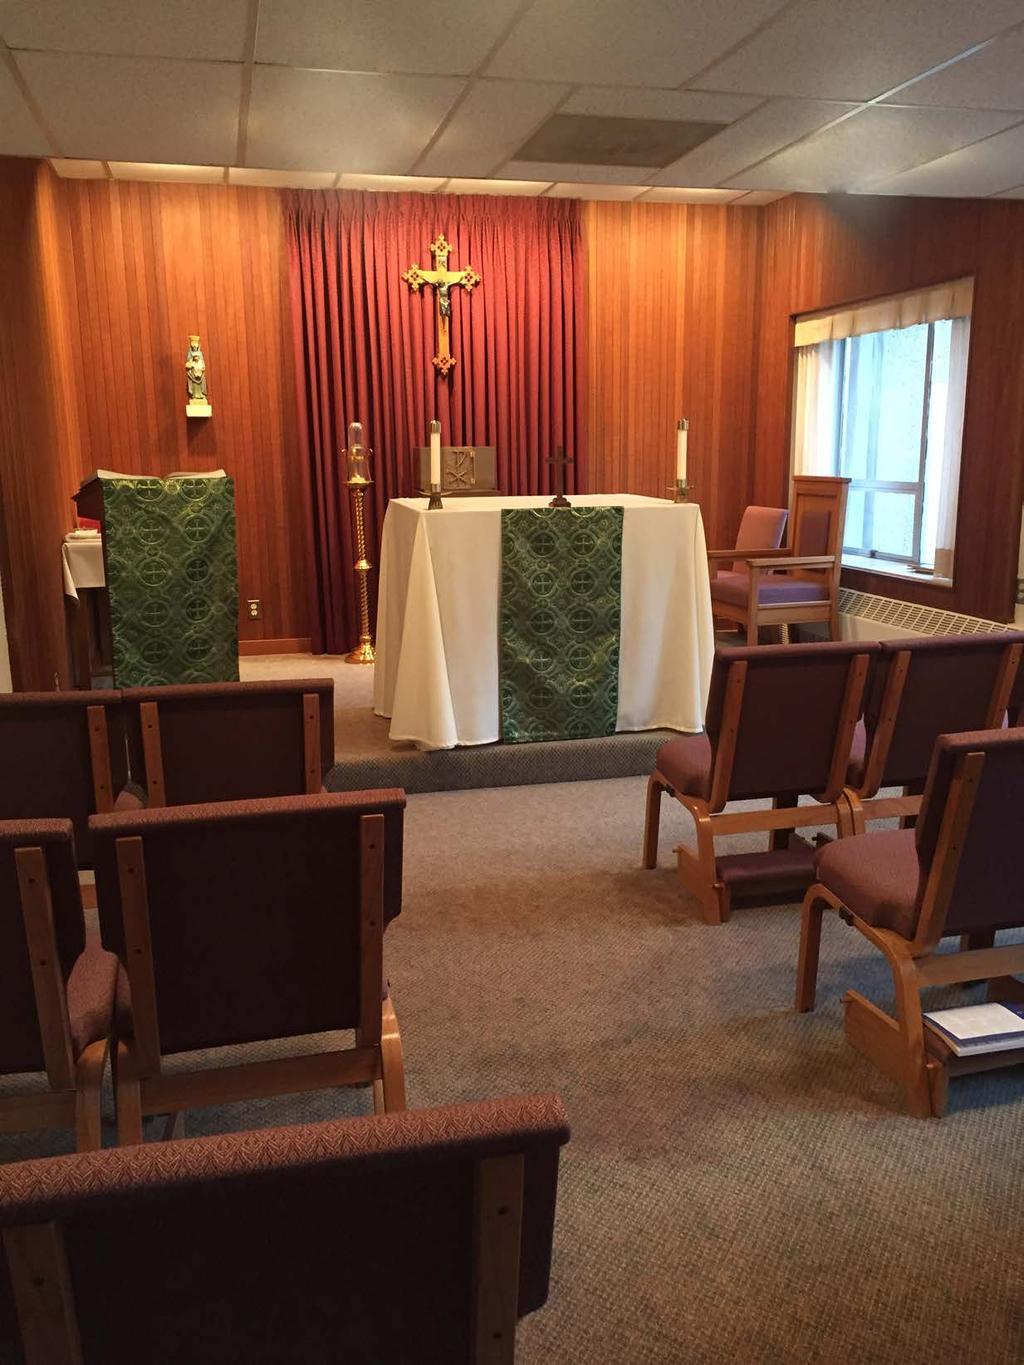 CHAPTER 6 Daily Mass at the Pastoral Center Beginning on November 1, the Solemnity of All Saints, the Pastoral Center will have a daily Mass.